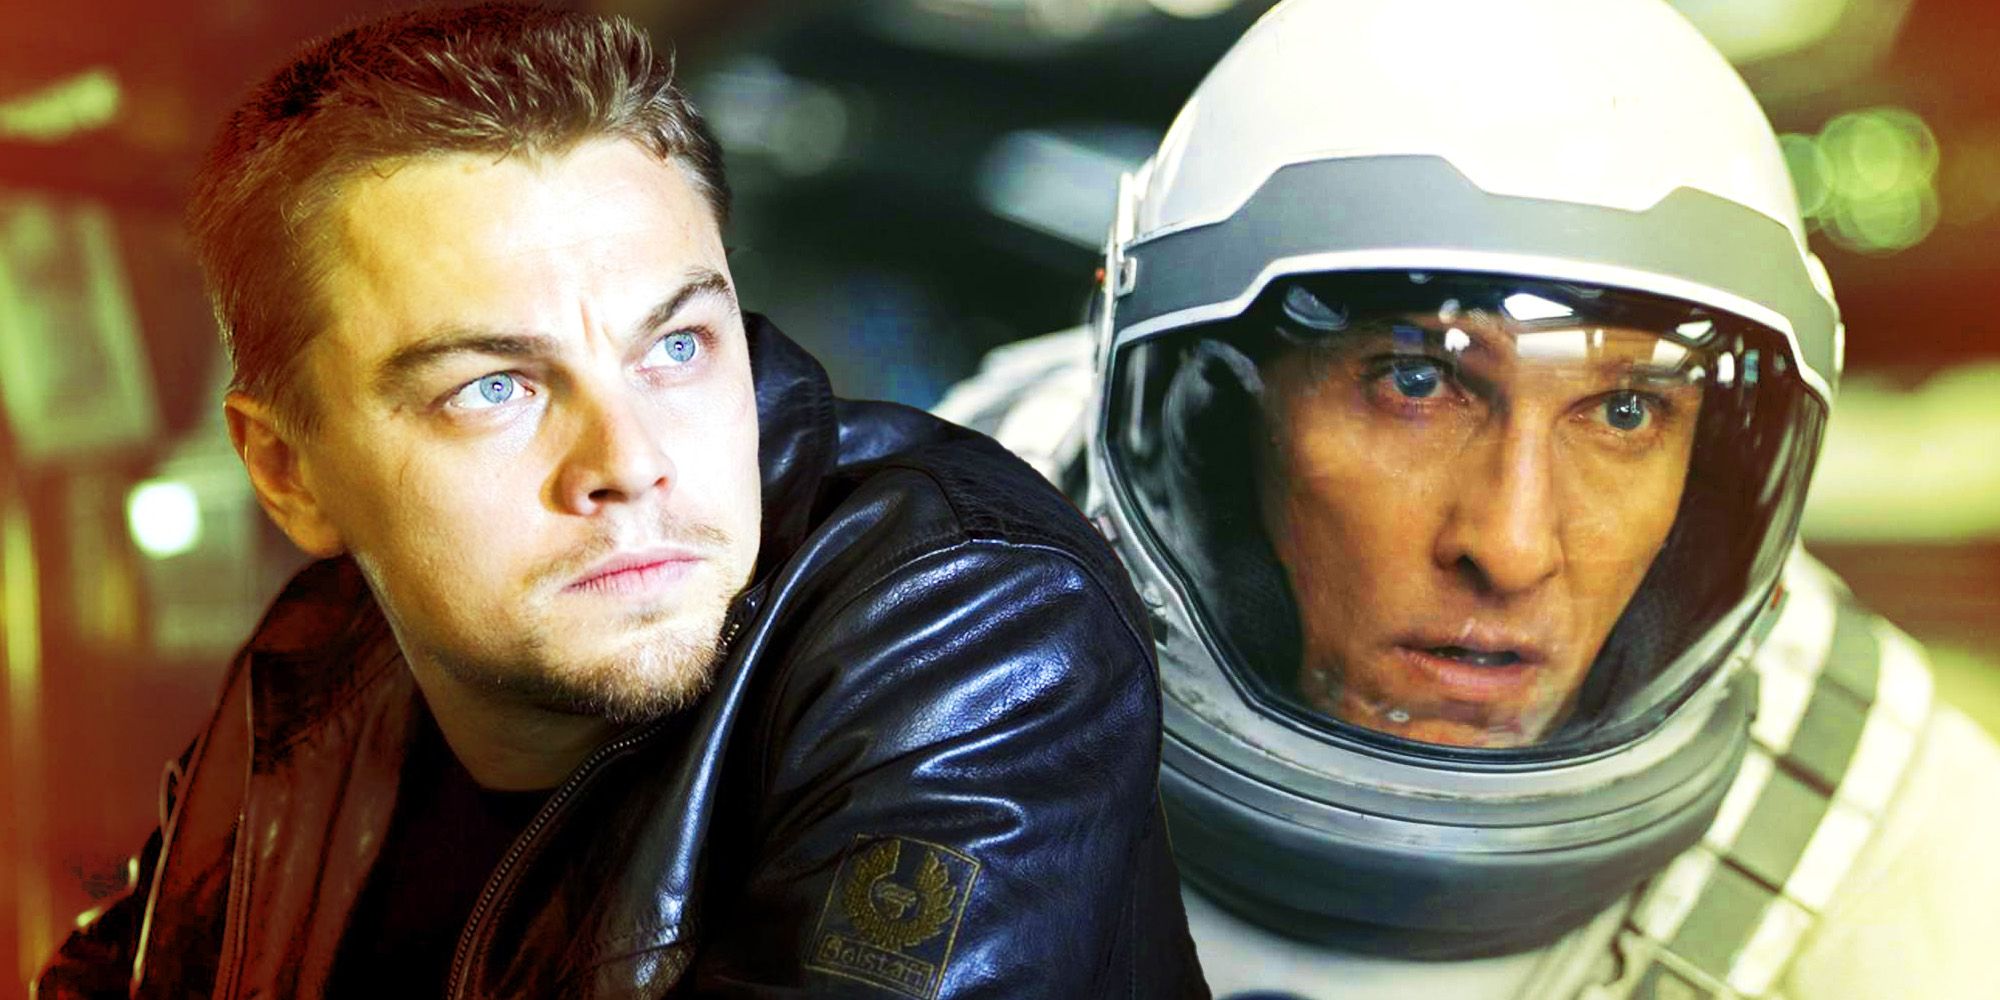 A custom image featuring Matthew McConaughey in Interstellar and Leonardo DiCaprio in The Departed